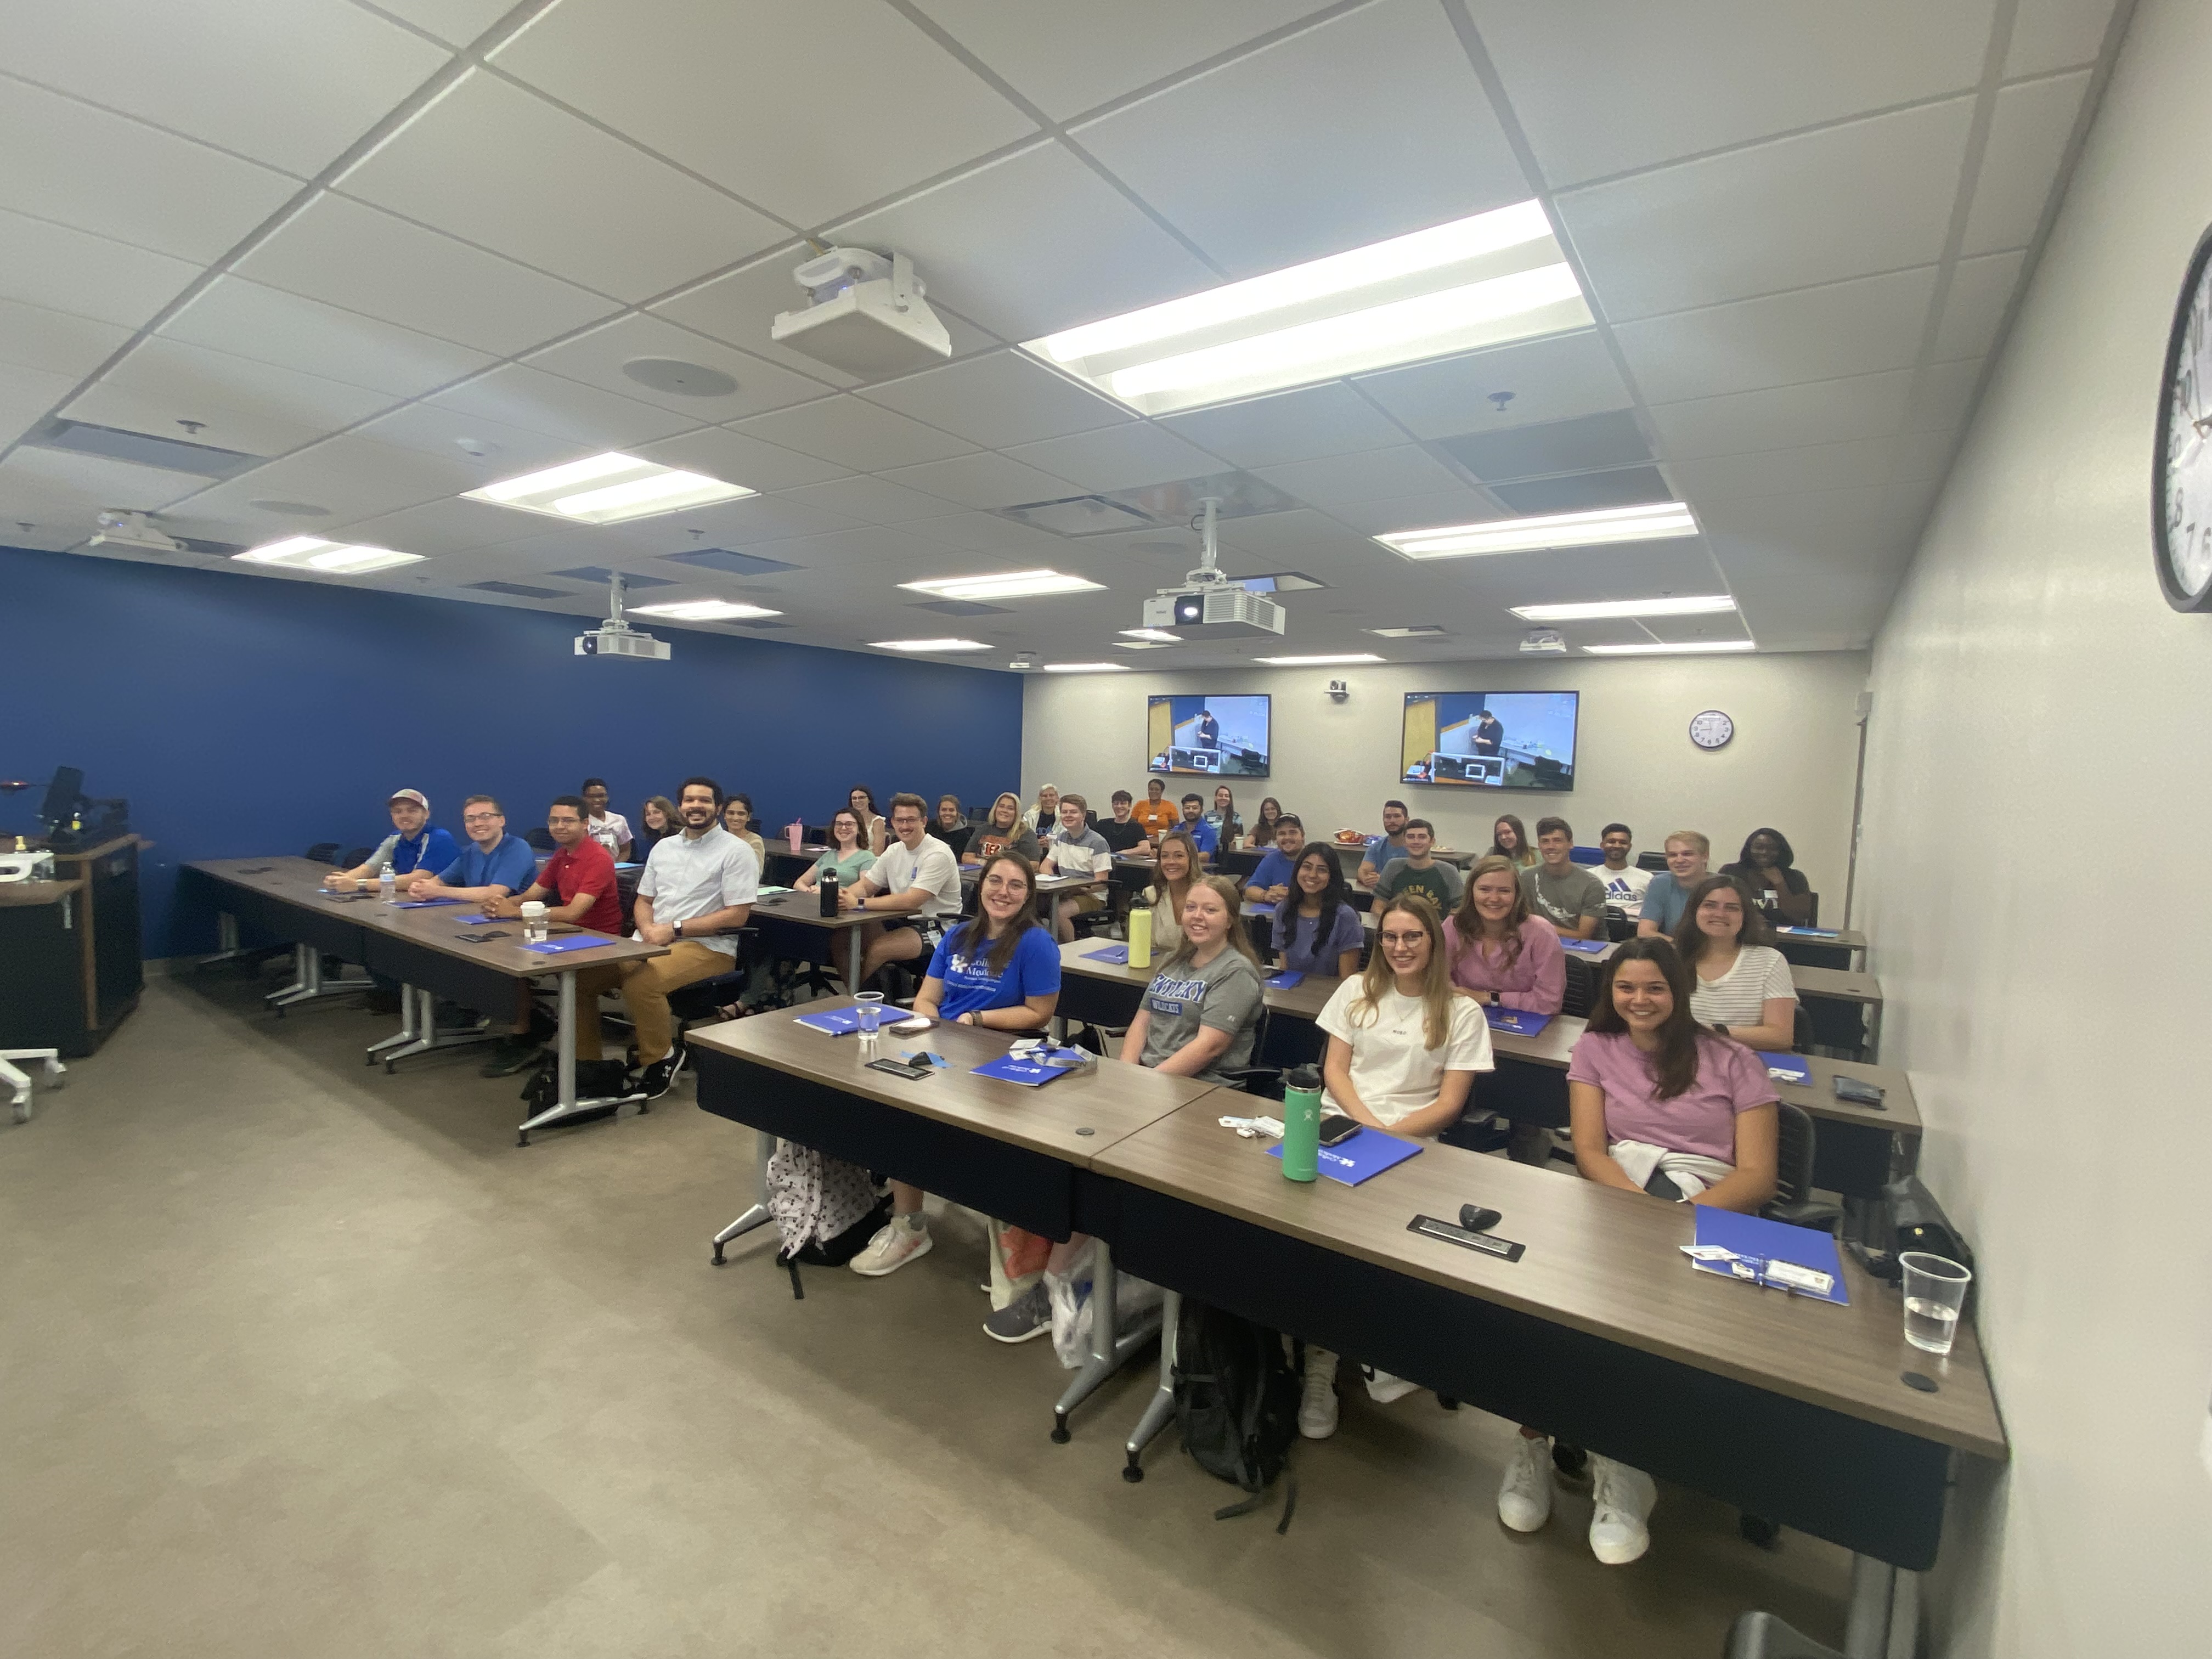 First year students in a classroom for orientation